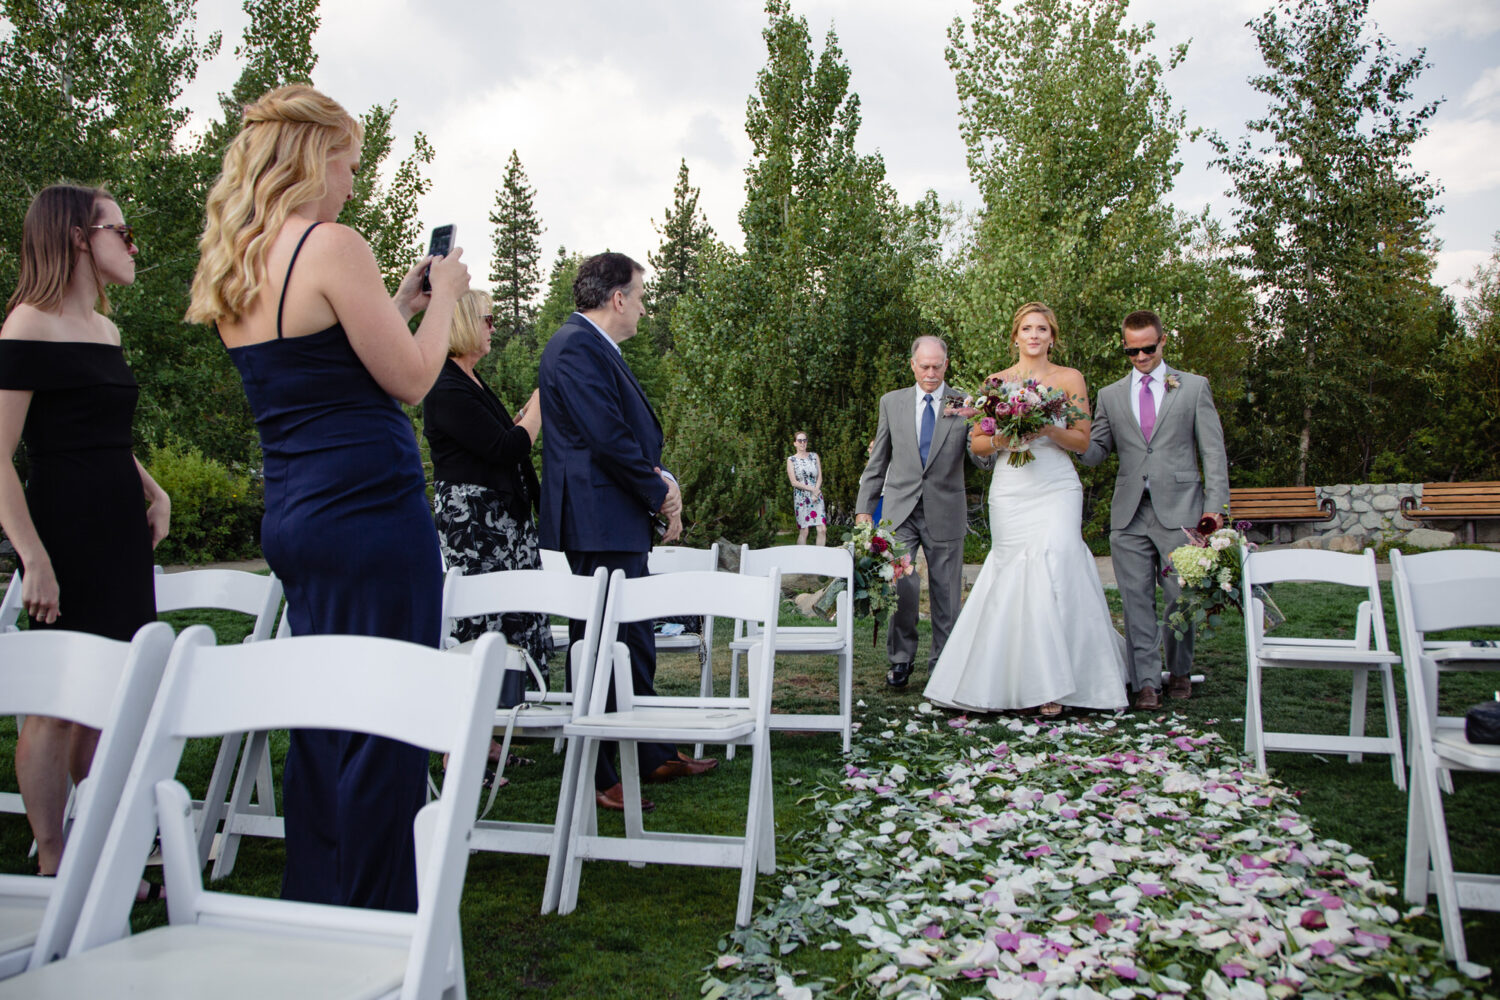 A wedding ceremony on the lawn at Gar Woods has views of Lake Tahoe with lush green trees as a backdrop.